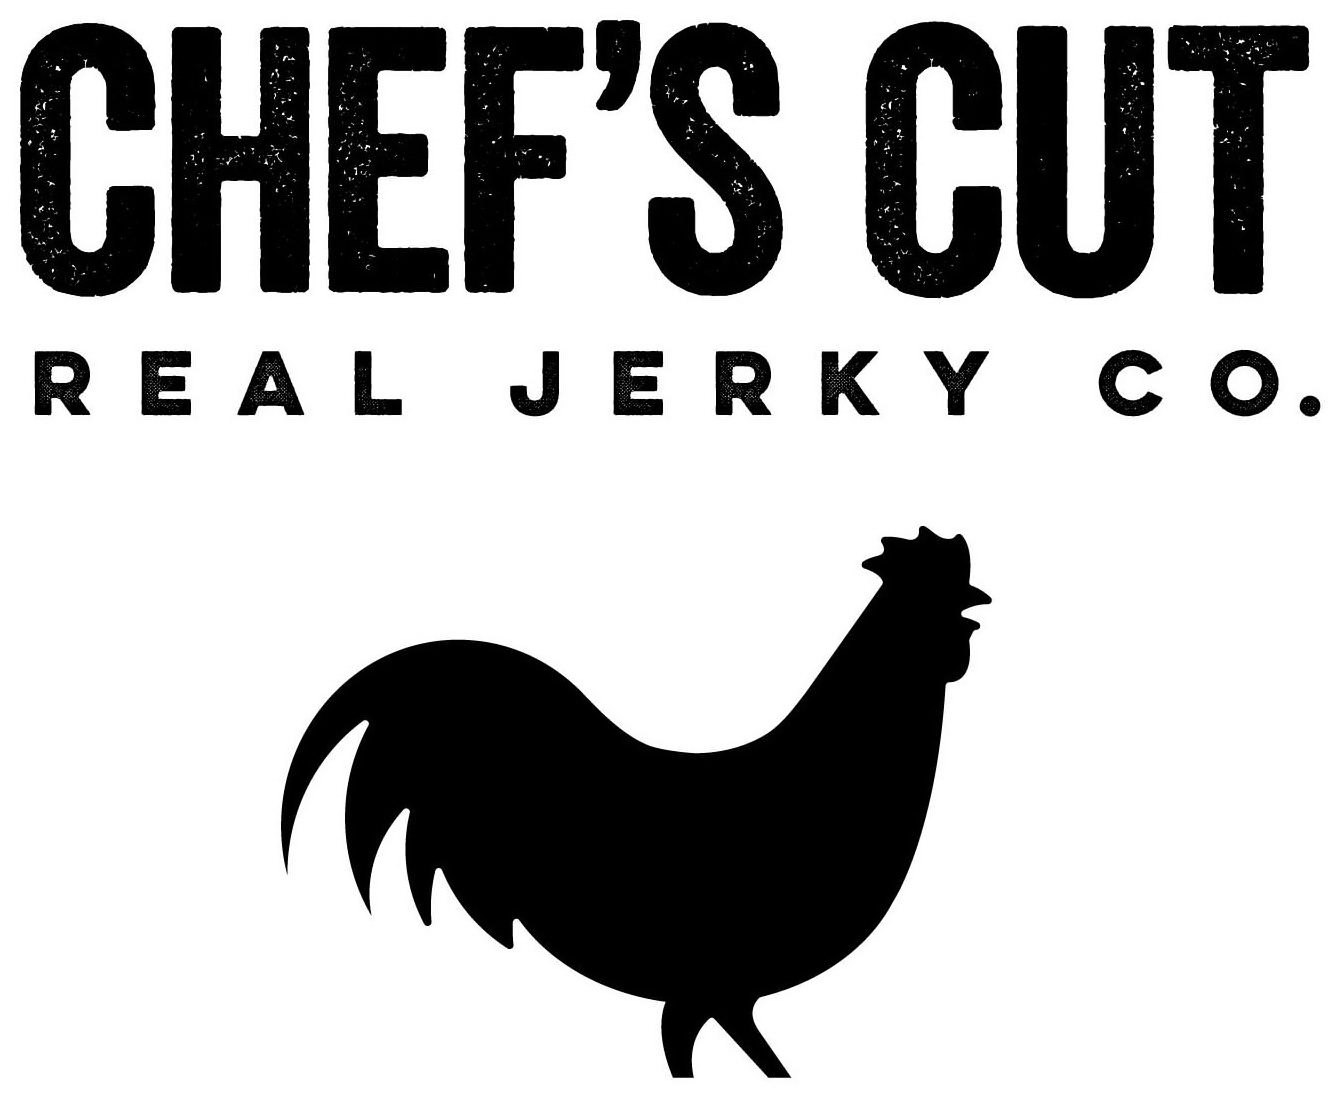  CHEF'S CUT REAL JERKY CO.